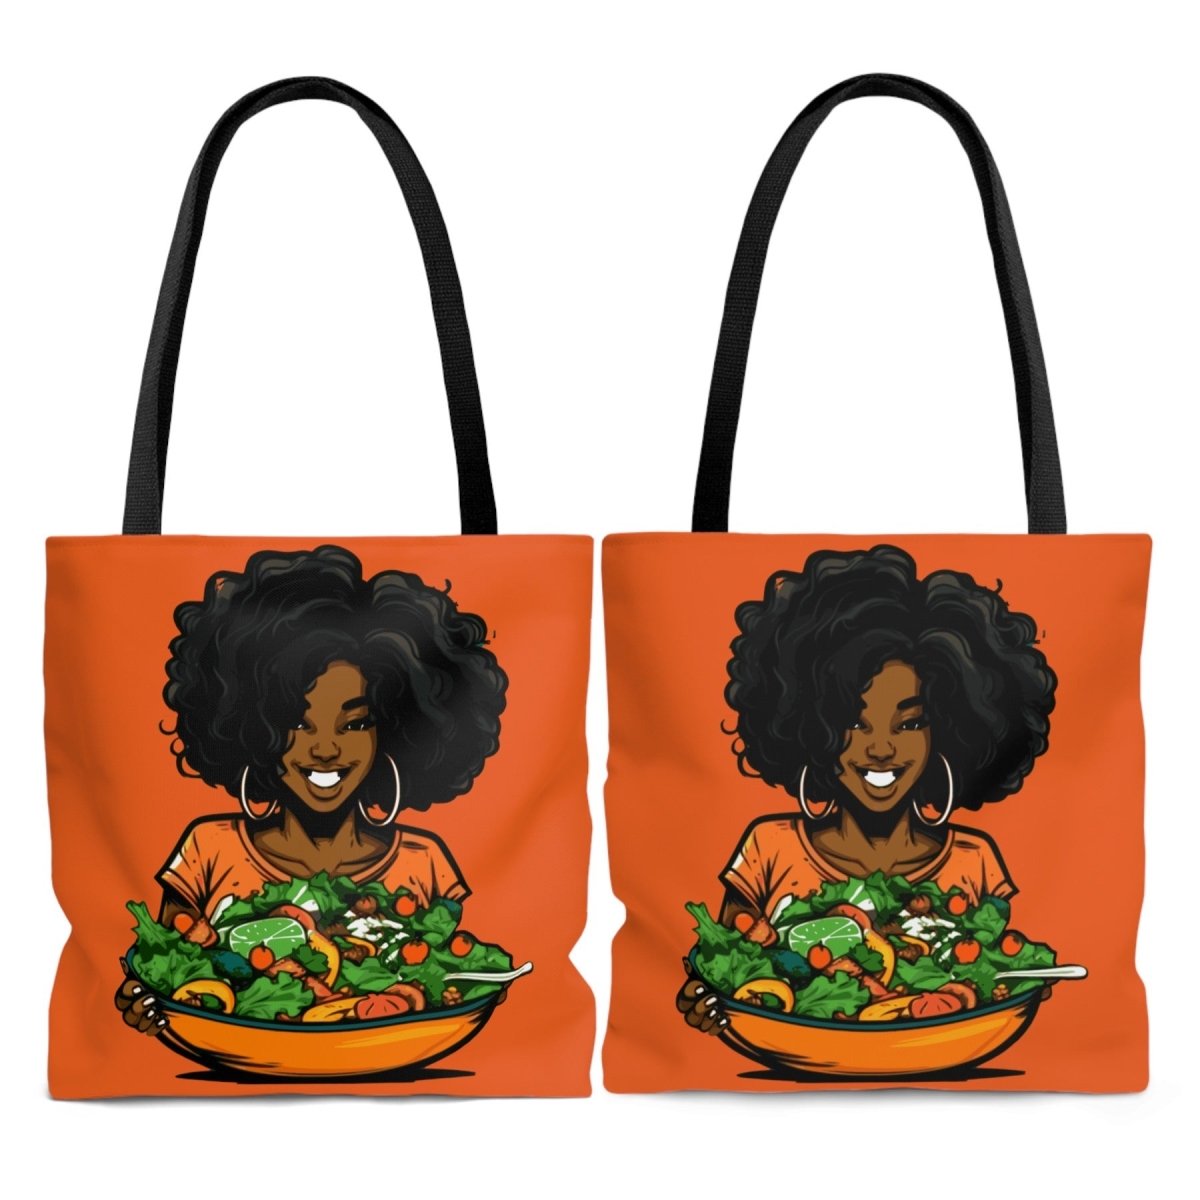 Afro Salad Tote Bag - The Trini Gee